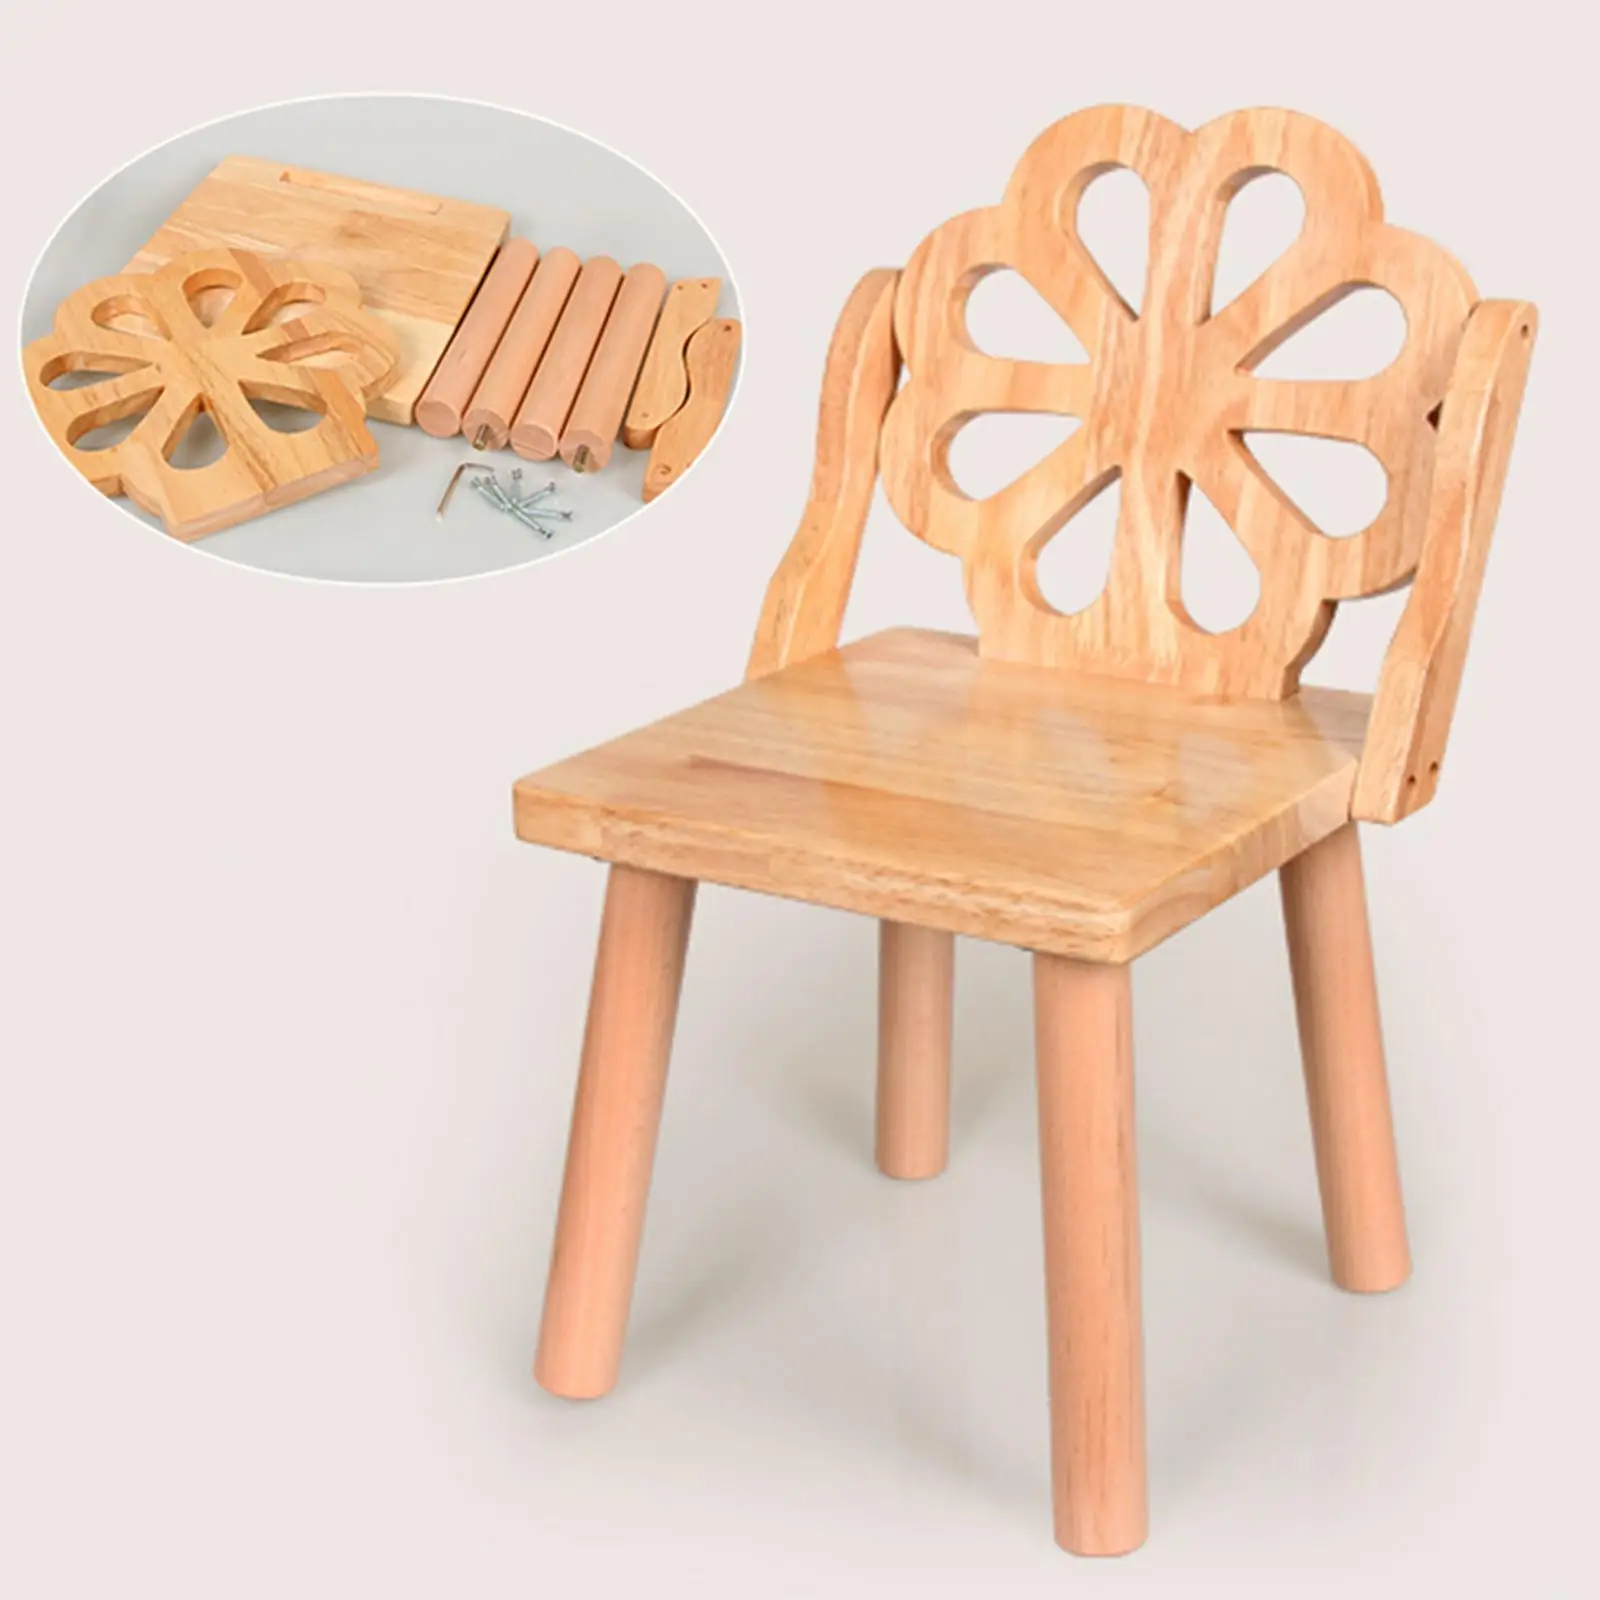 Wooden Removable Wooden Child Stool Space Saving Durable Ultralight Small Seat Stool for Kids for Nursery School Bathroom Home